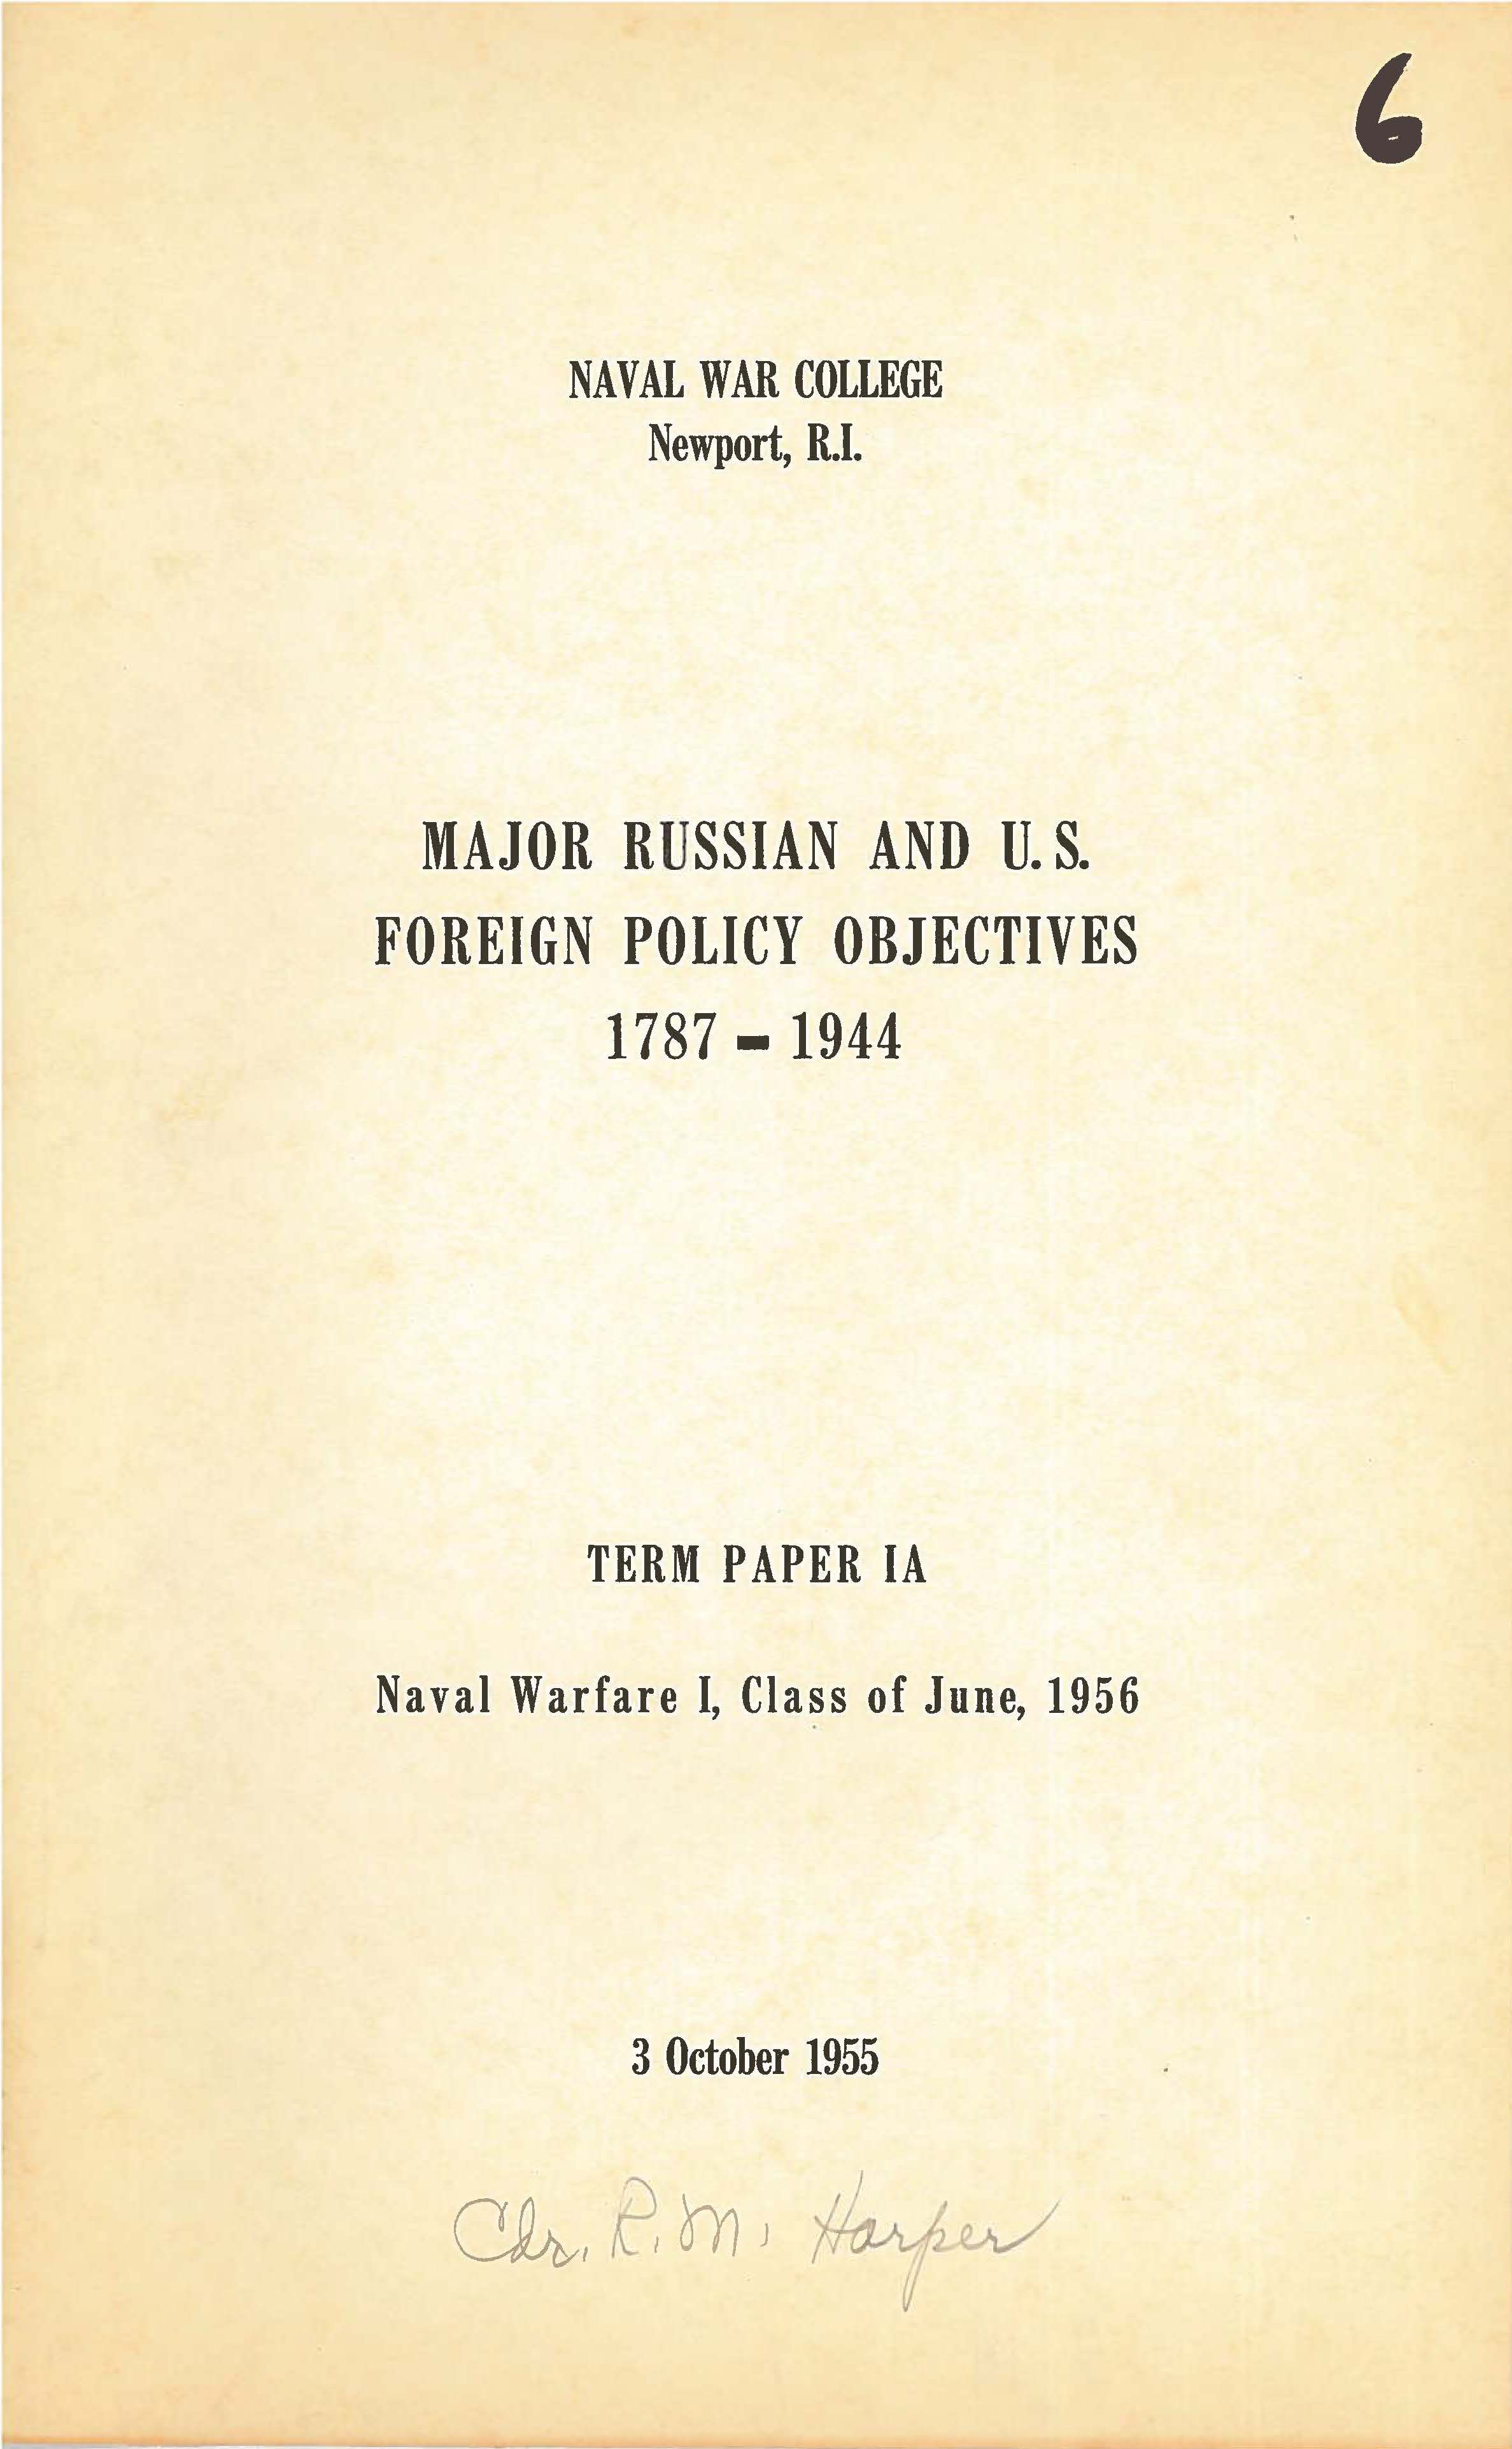 Major Russian and U.S. Foreign Policy Objectives, 1787-1944, R.M. Harper